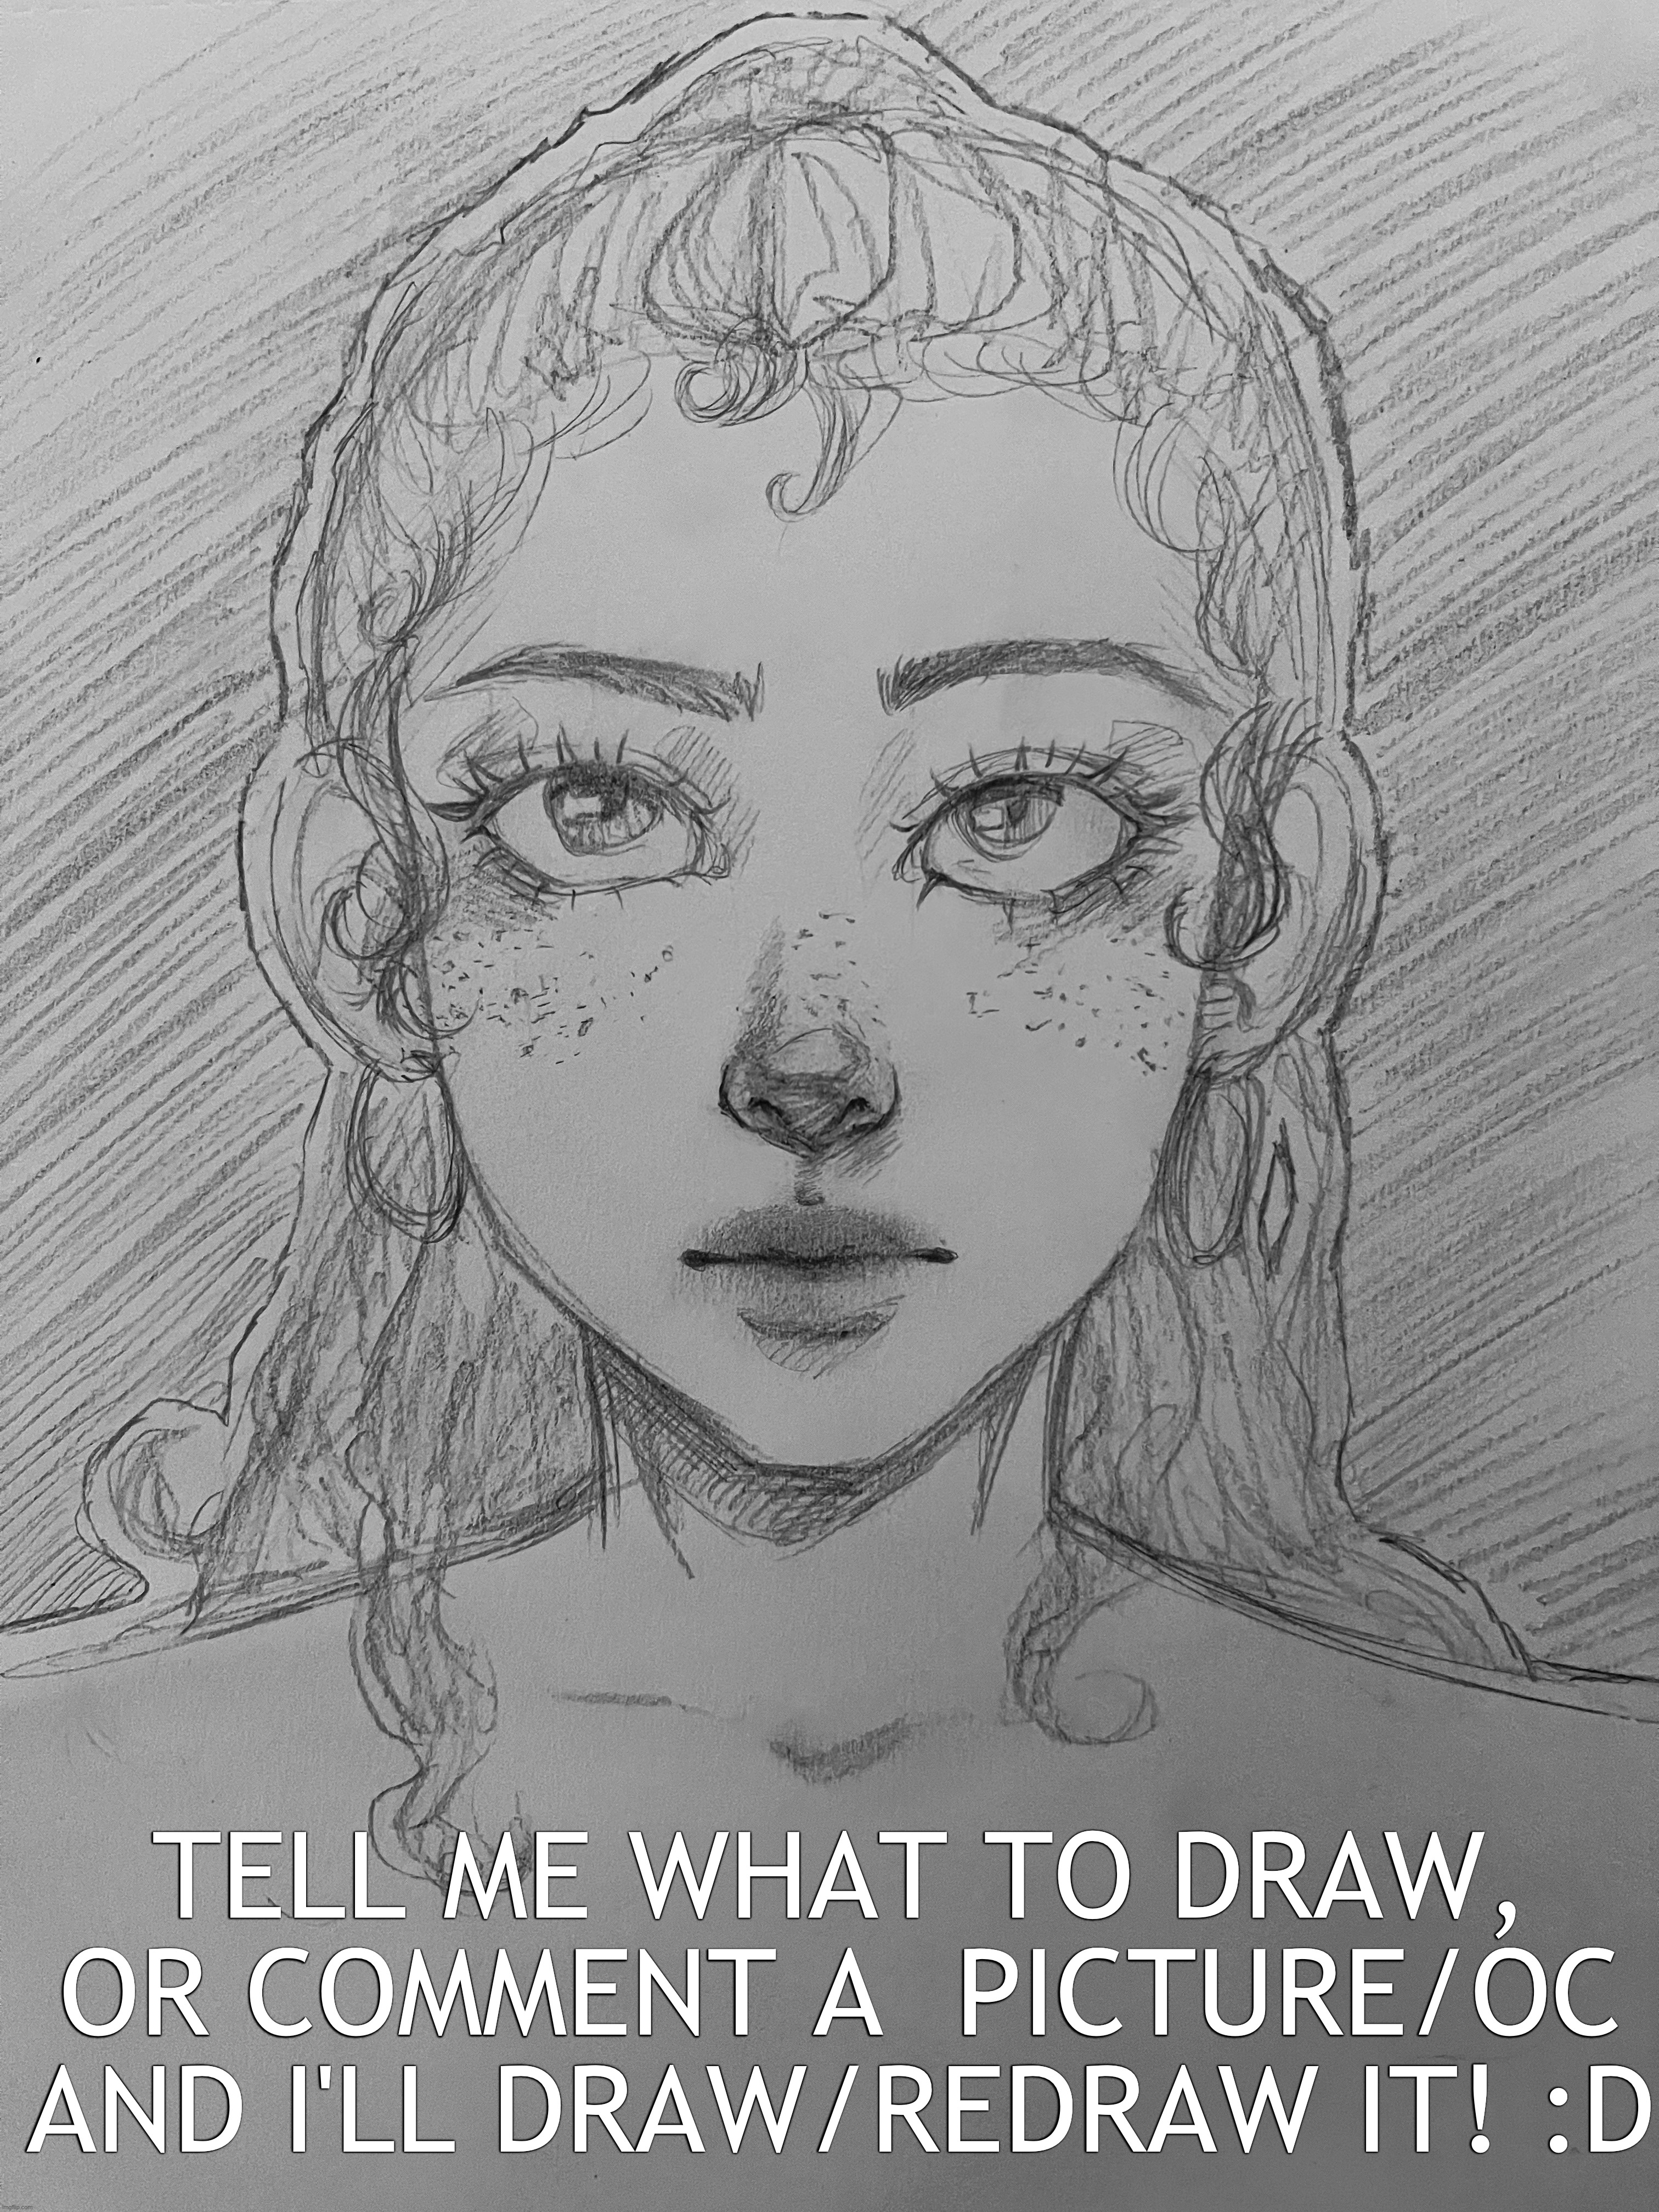 i guess i don't need to post my sketches when i just ask for things but whatever | TELL ME WHAT TO DRAW, OR COMMENT A  PICTURE/OC AND I'LL DRAW/REDRAW IT! :D | image tagged in art,drawings | made w/ Imgflip meme maker